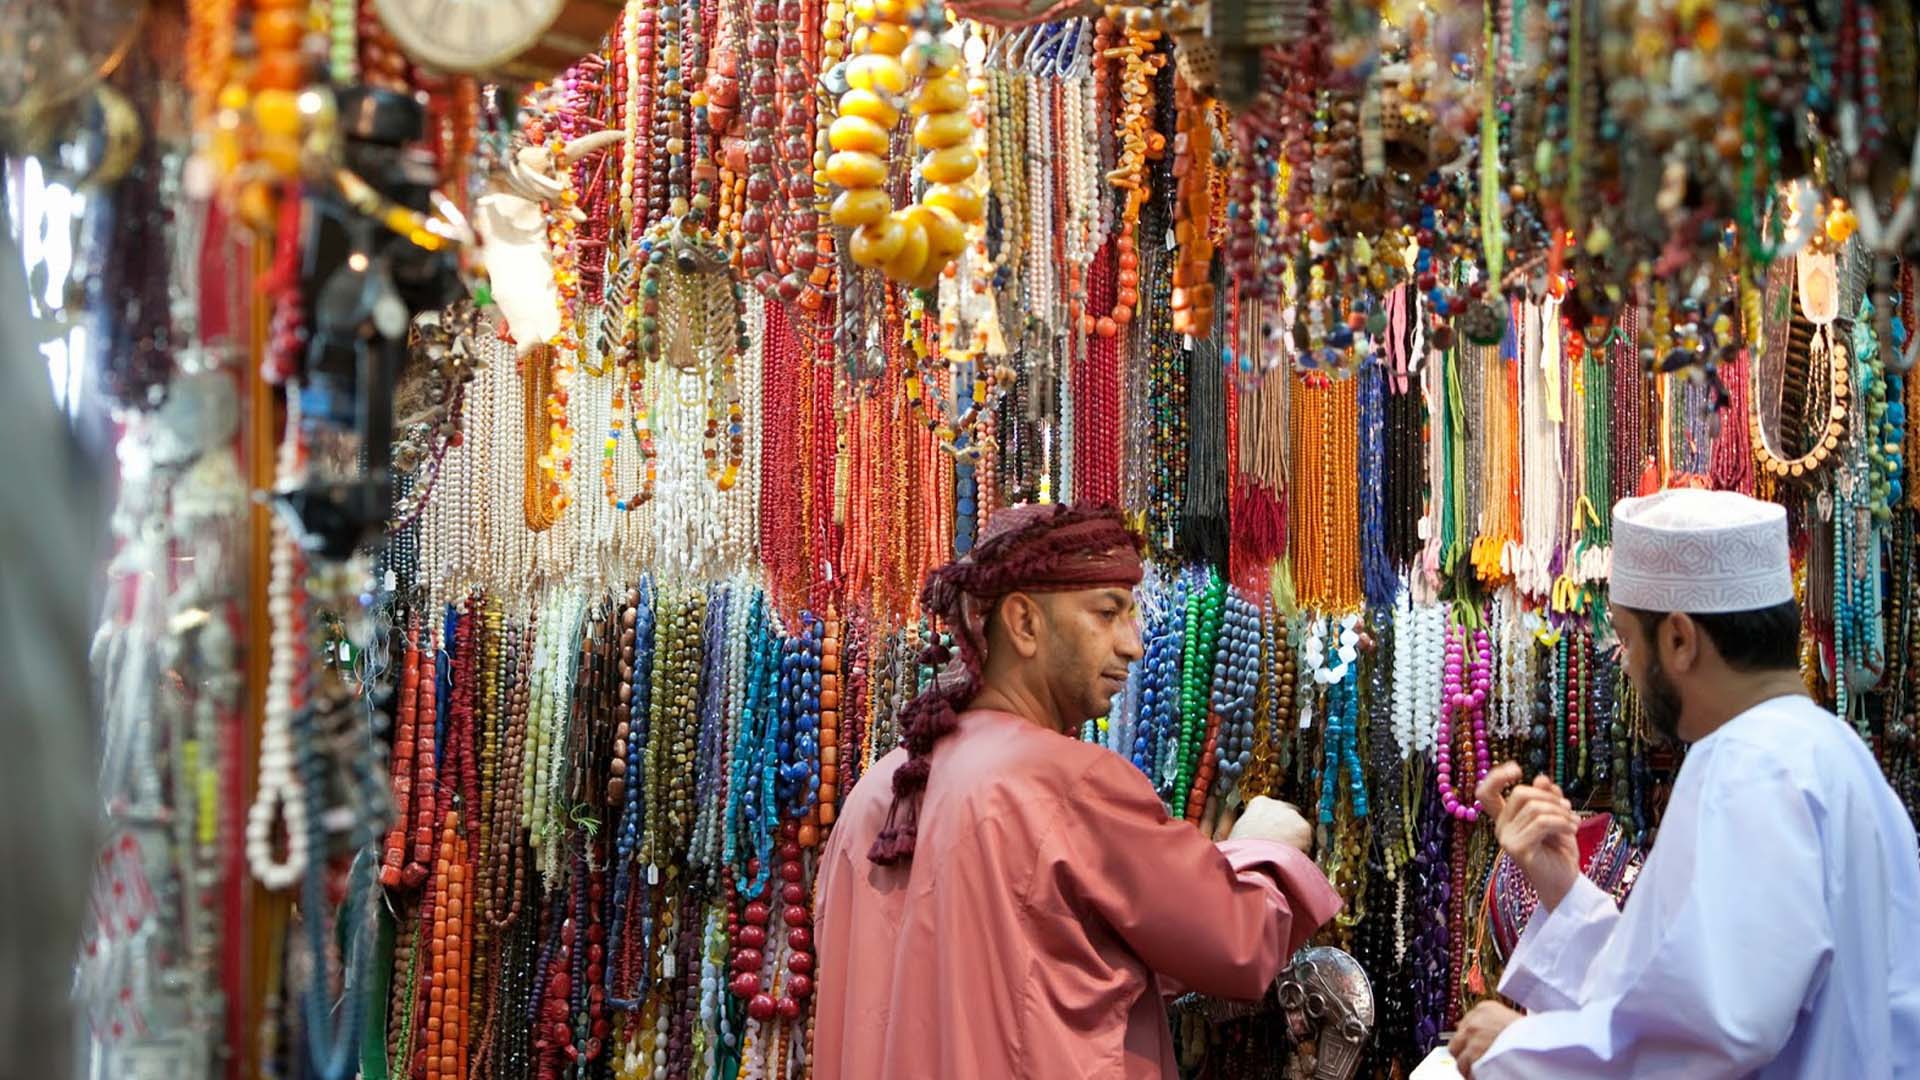 A panoramic photograph immortalizes the delightful shopping experience at a traditional shop in Muscat, where vibrant coloured beads overflow, creating a captivating scene.